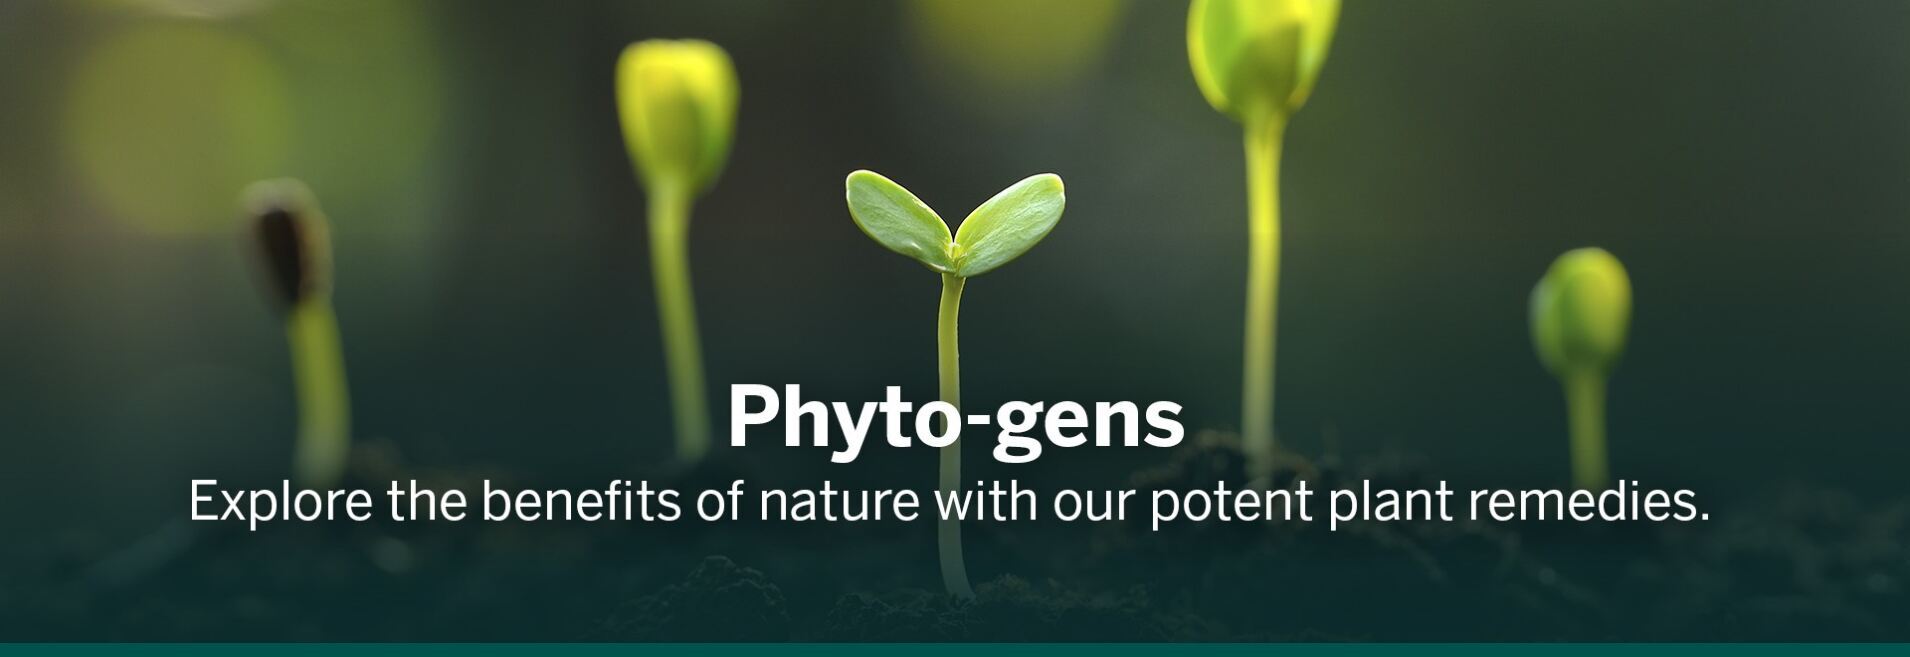 Phyto-gens, explore the benefits of nature with Genestra potent plant remedies with an image of plants sprouting and growing.